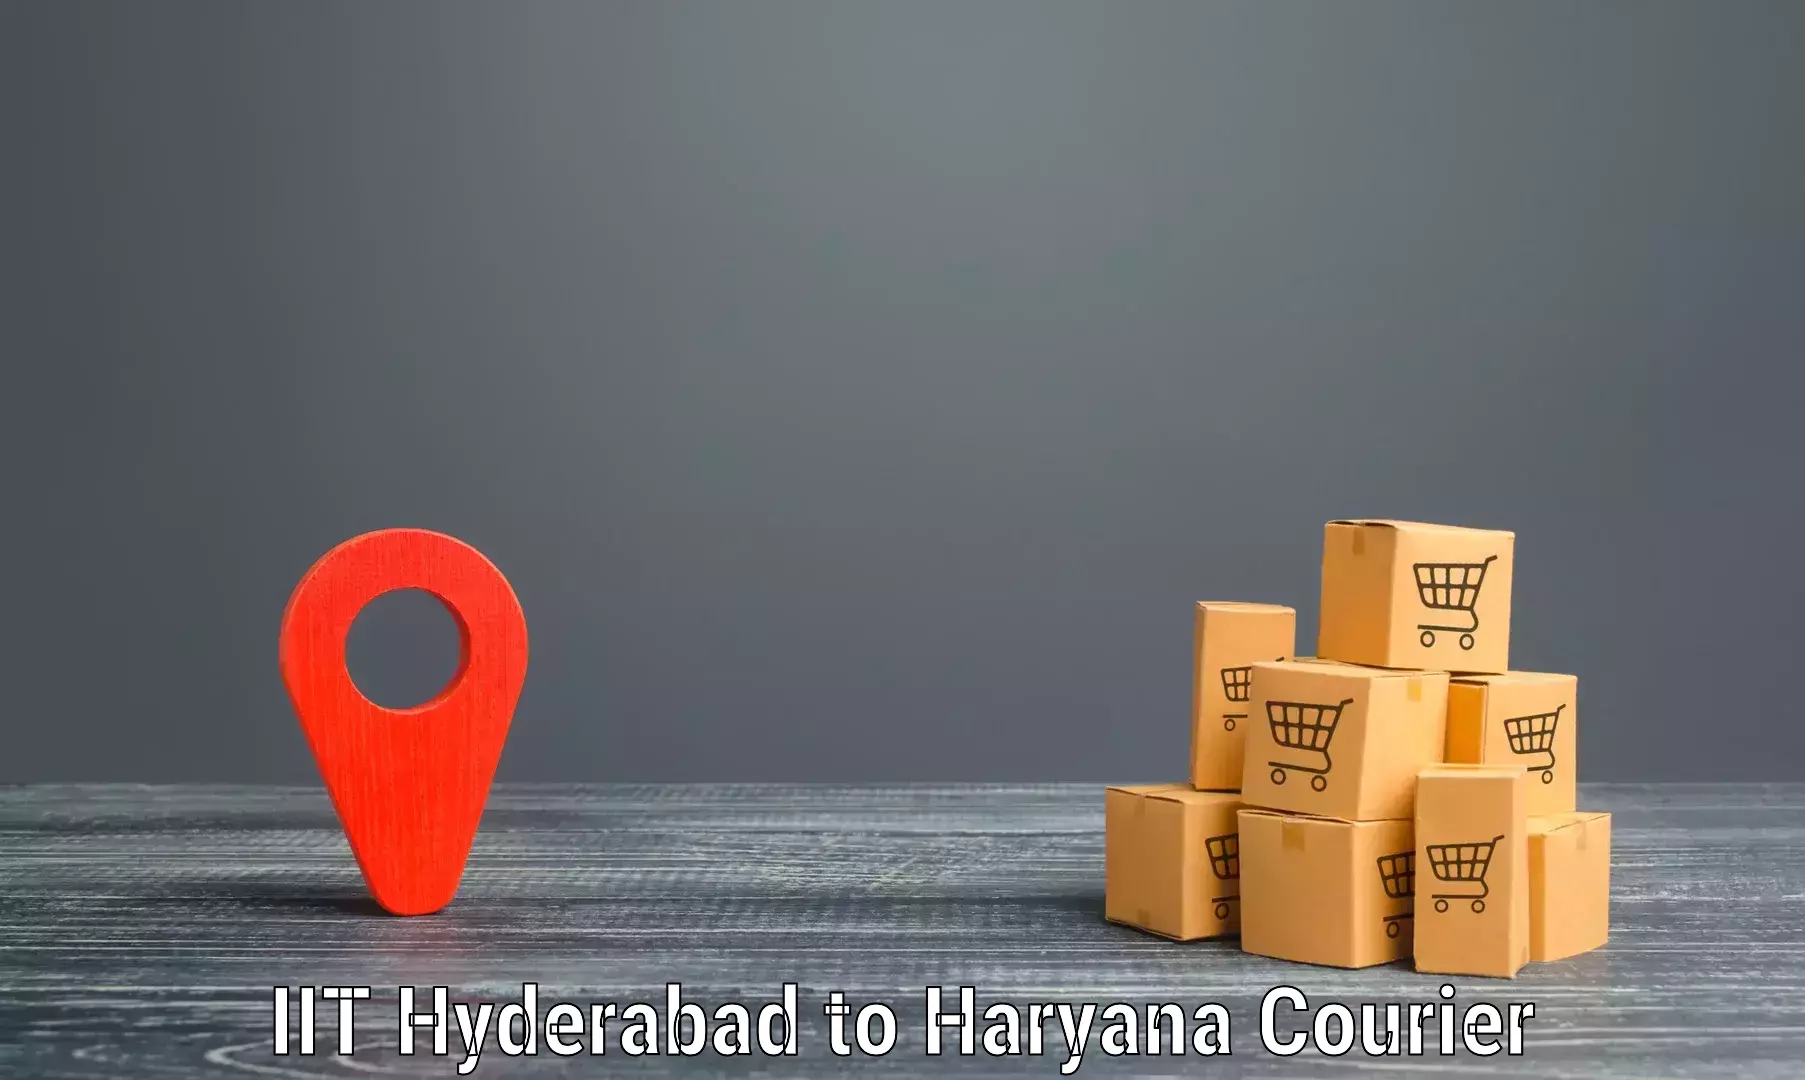 Business delivery service IIT Hyderabad to Jhajjar